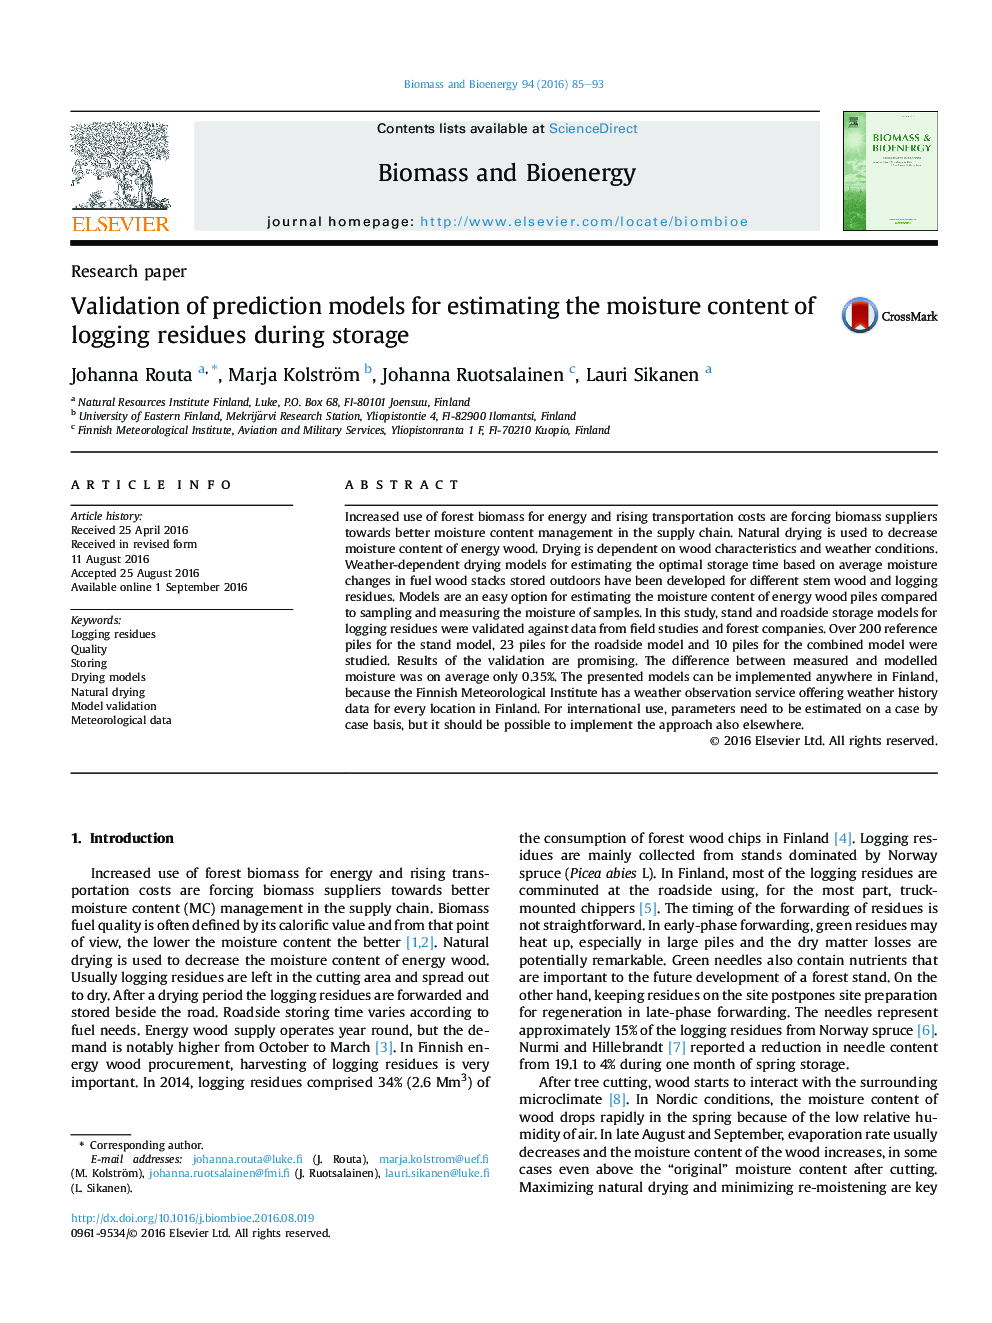 Validation of prediction models for estimating the moisture content of logging residues during storage